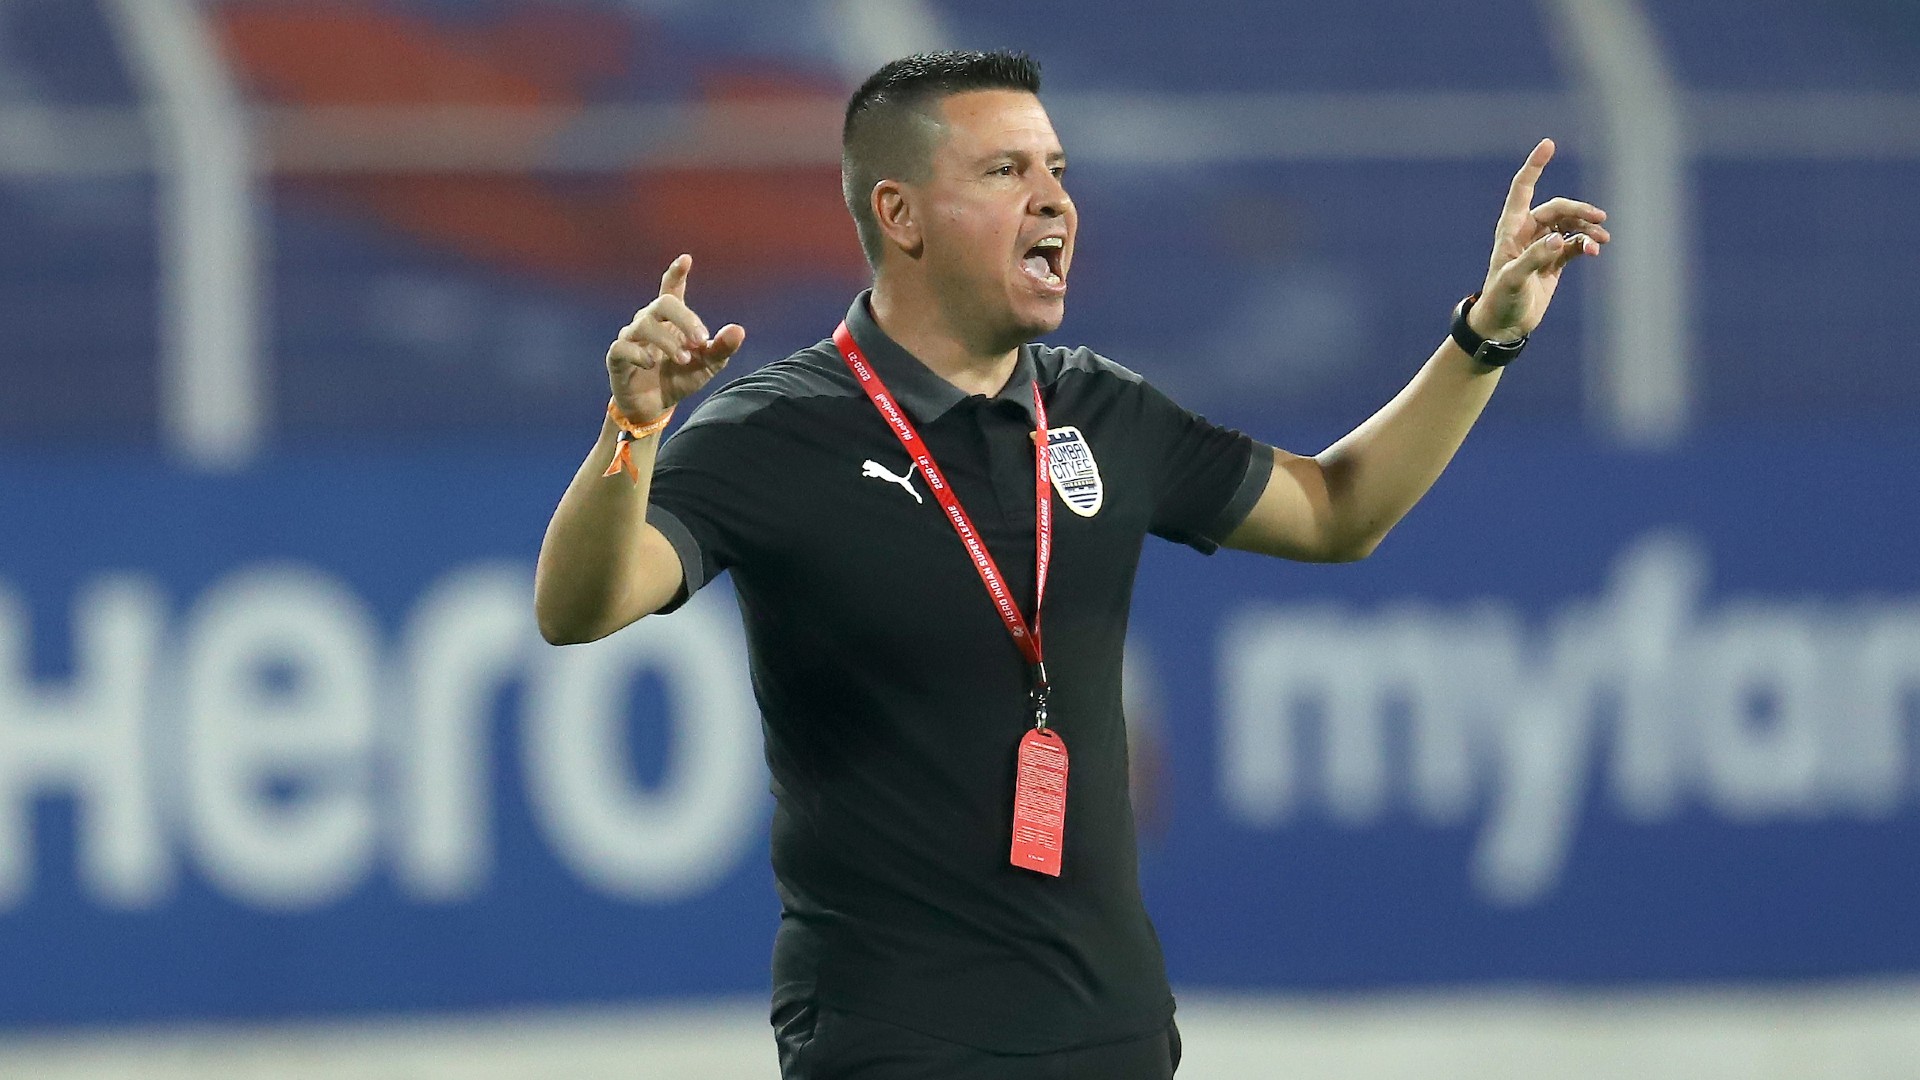 'Most successful Spanish coach' - What are the top 5 achievements of Sergio Lobera in India?